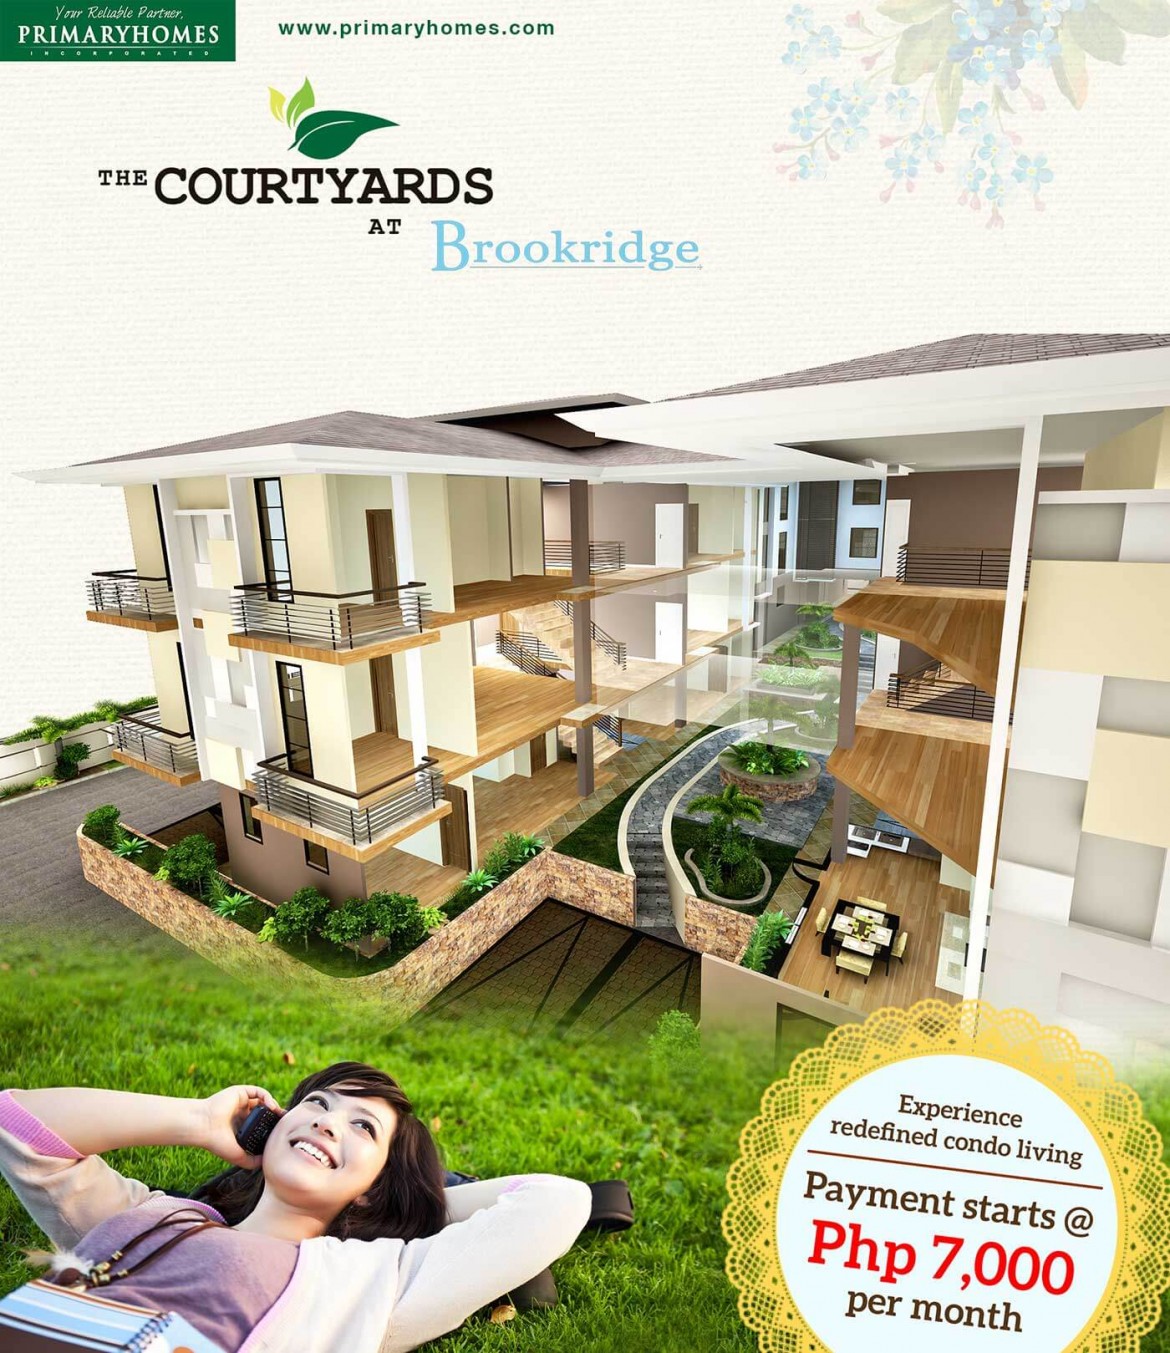 SALES PROMO. The Courtyards at Brookridge is offering a great BER deal promo with payments start at P7,000 per month.